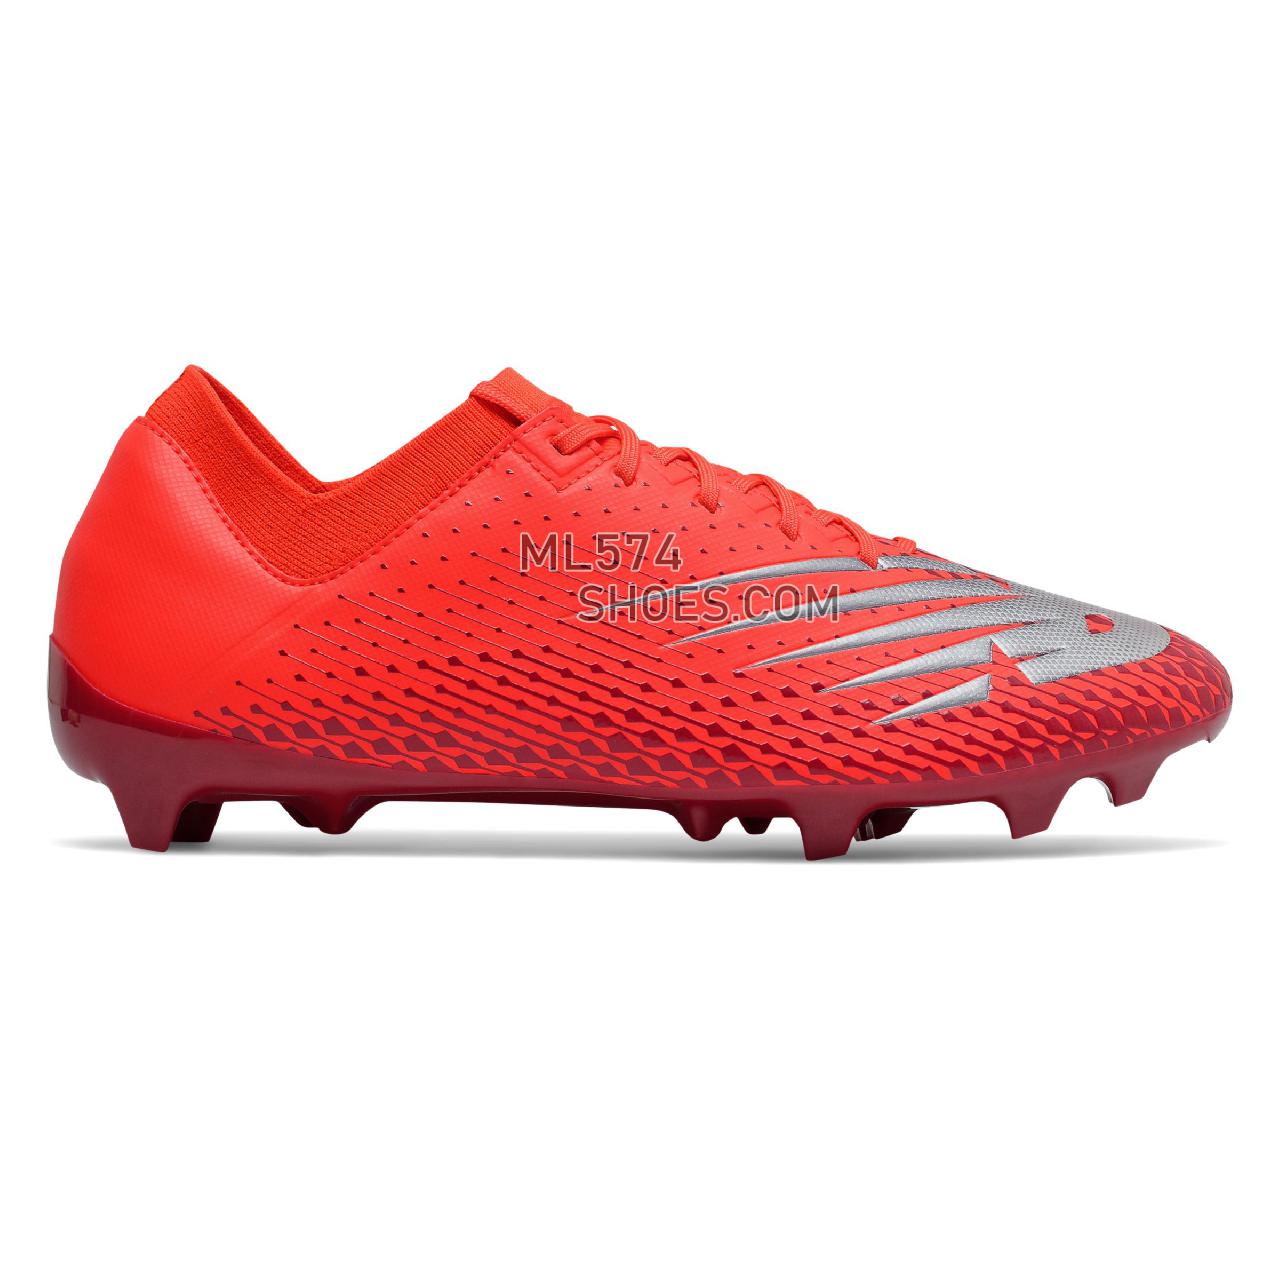 New Balance Furon v6 Dispatch FG - Men's Soccer - Neo Flame with Neo Crimson and Garnet - MSF3FFC6